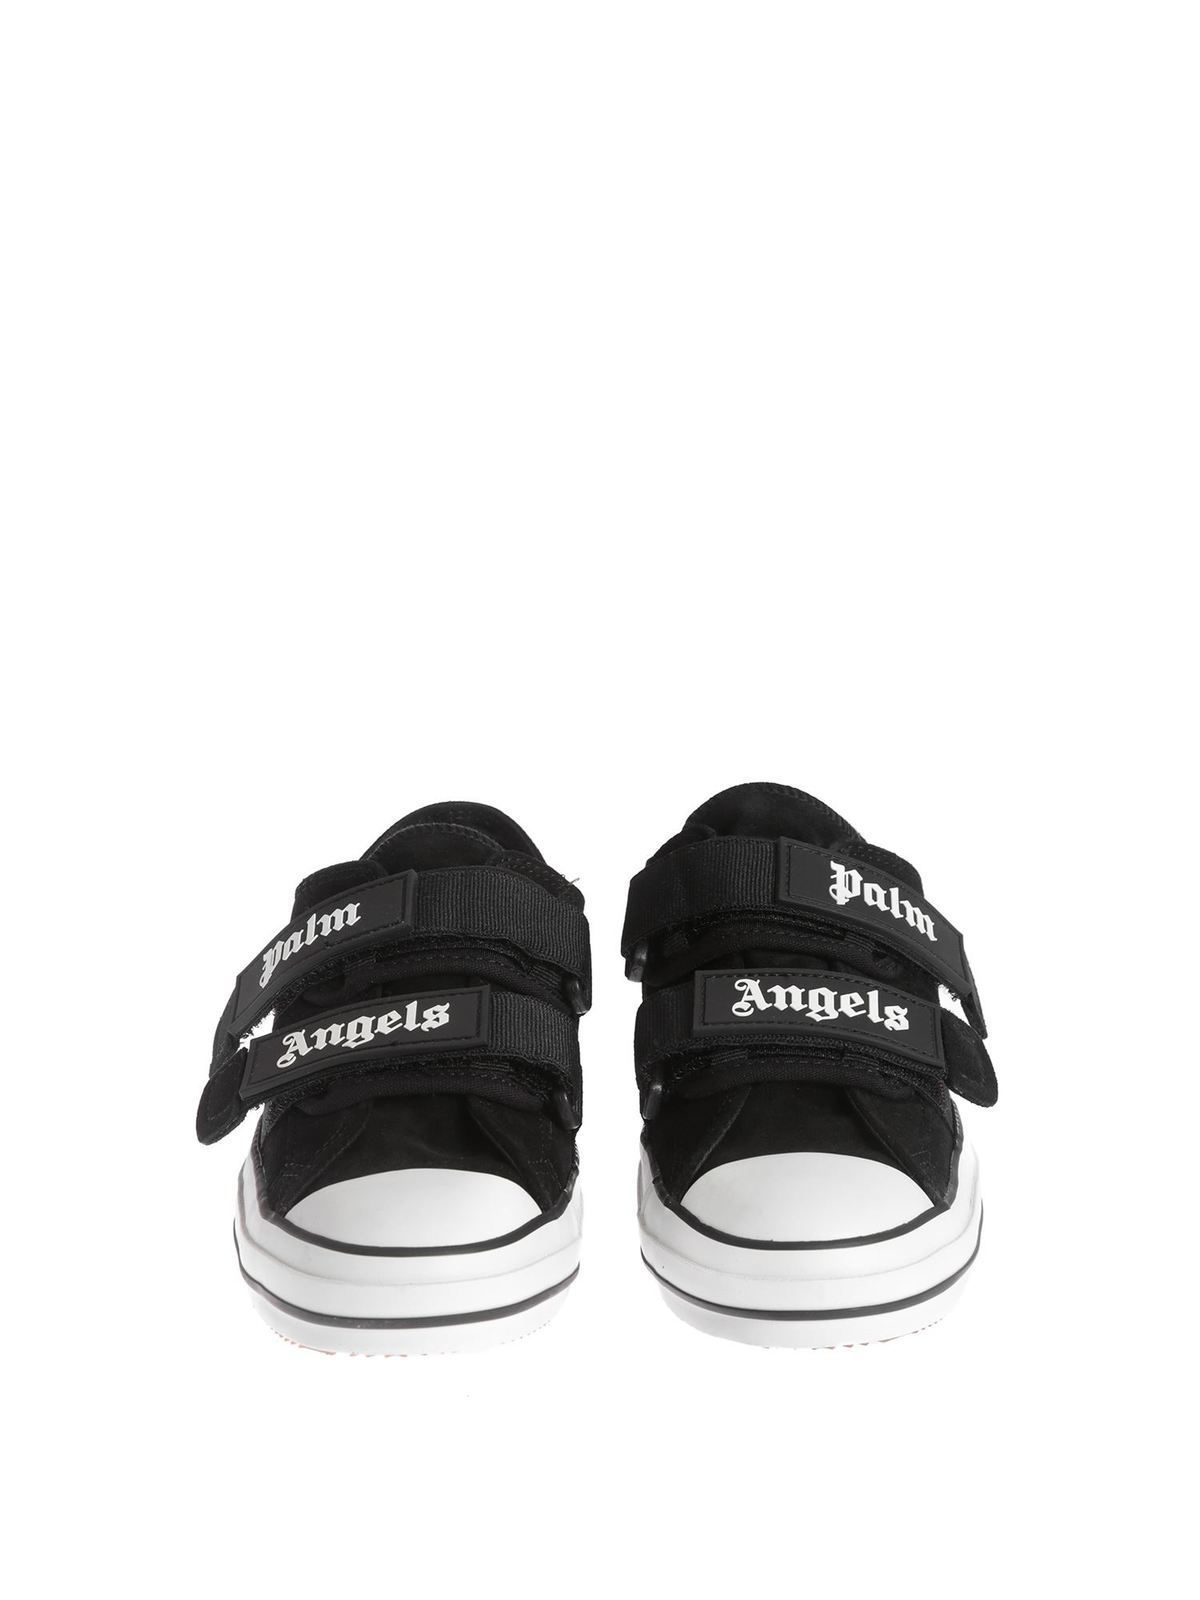 palm angels velcro sneakers